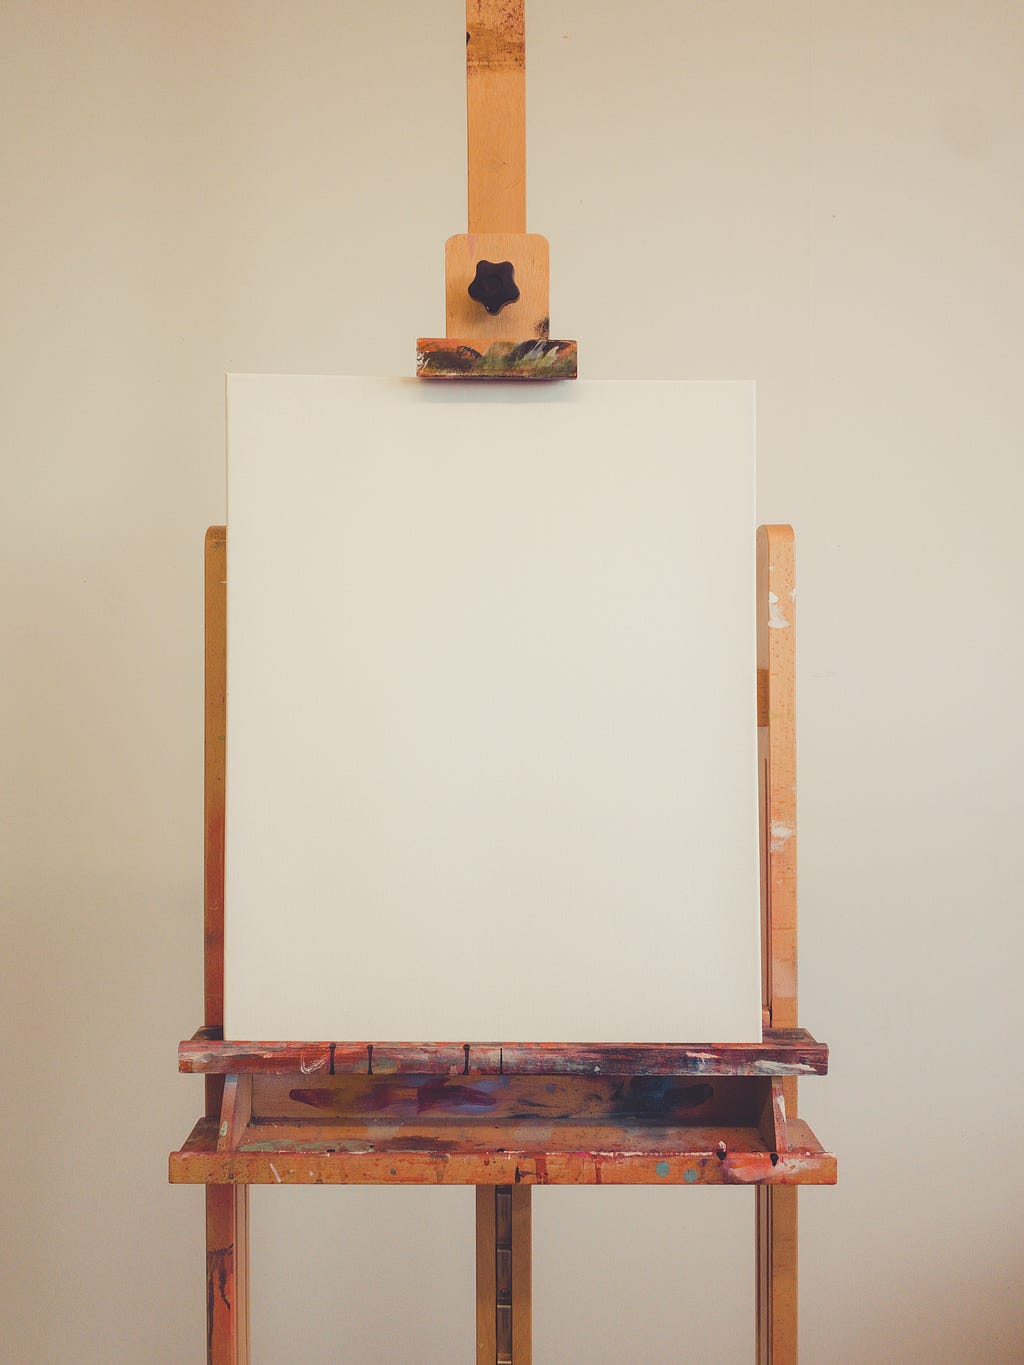 A blank canvas on a wooden artist’s easel.